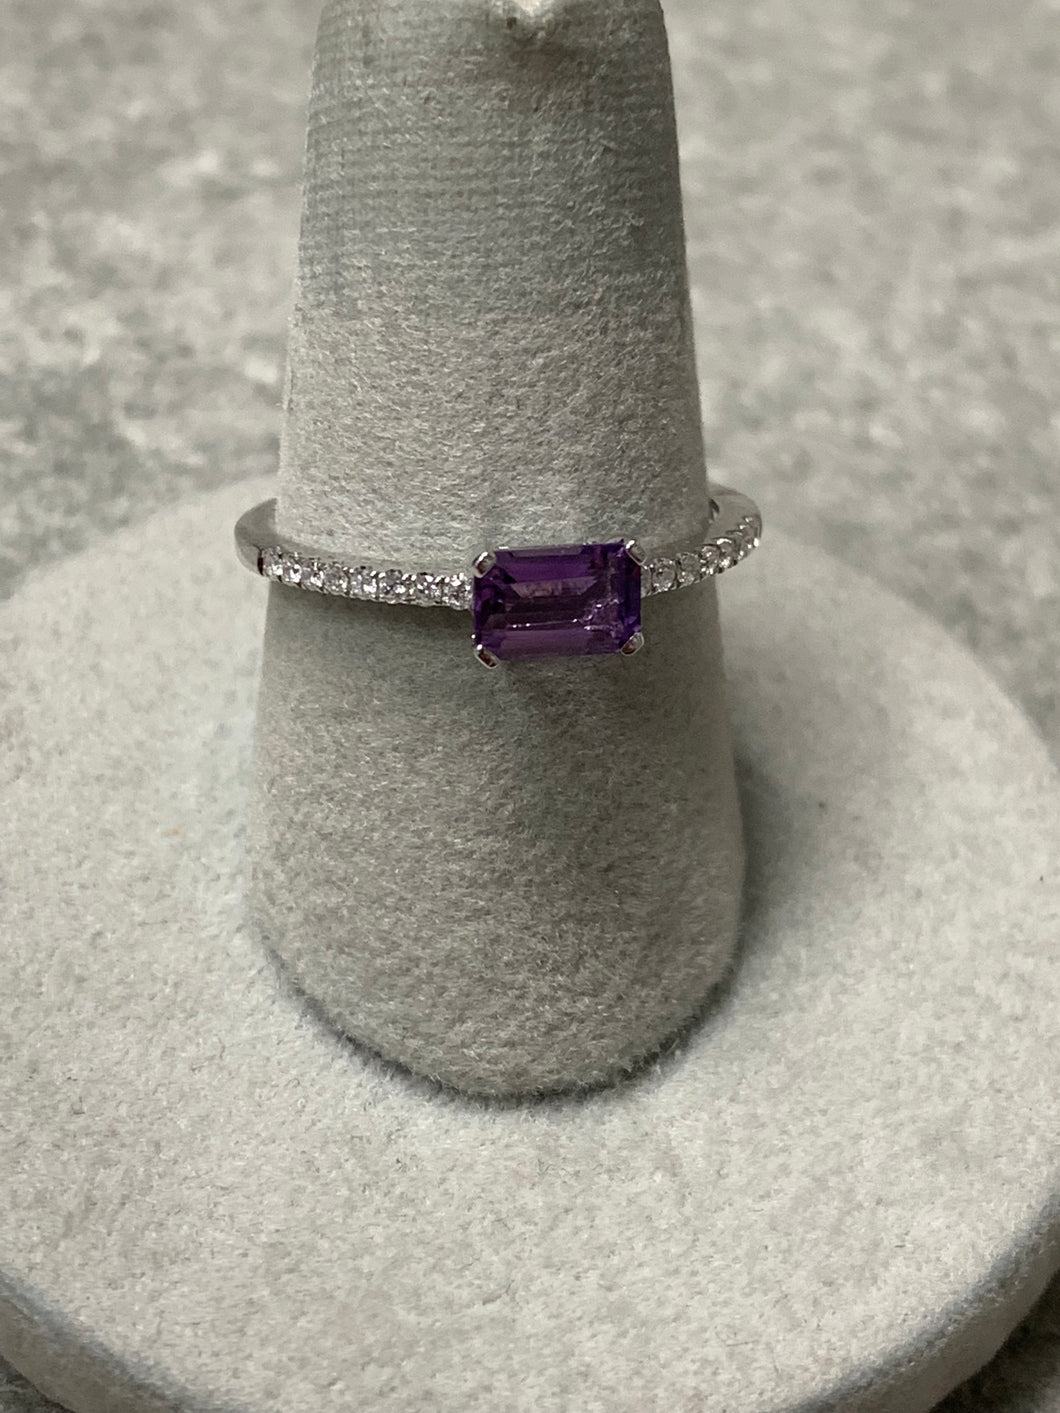 One Ladies 14k White Gold Diamond and Amethyst Ring